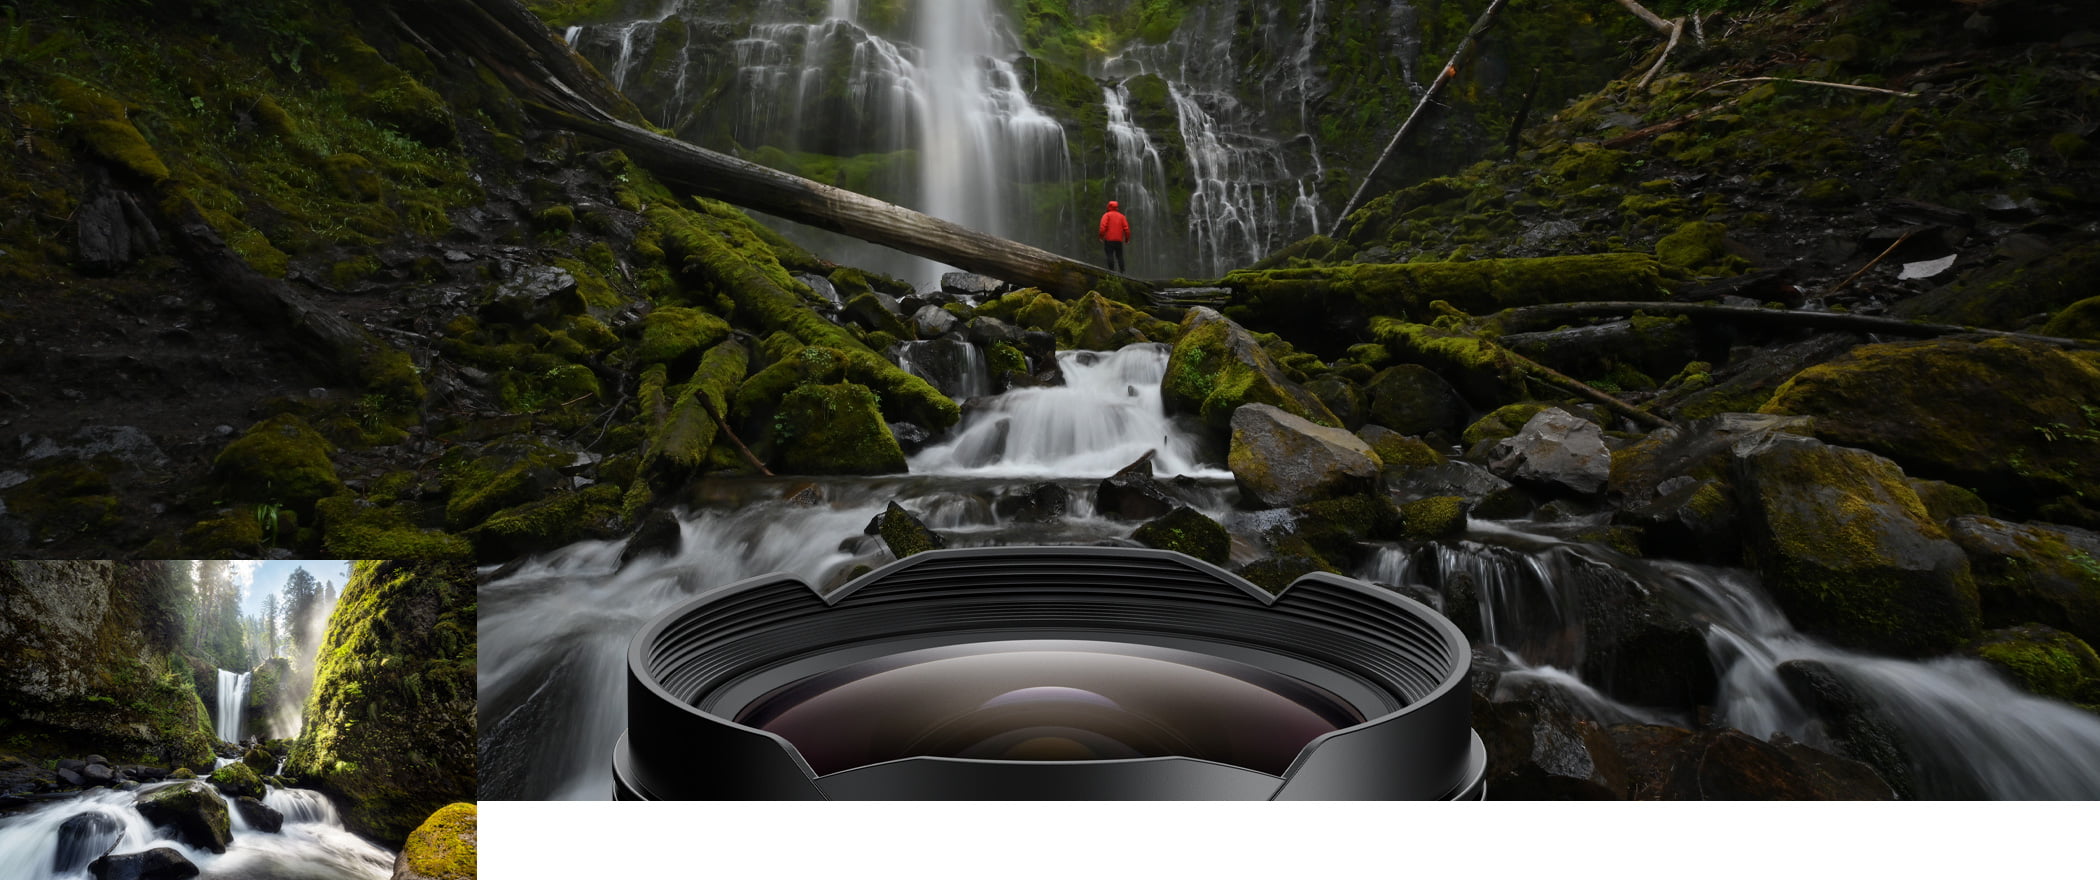 Photo of a person in a forest, inset with another image of a waterfall, both taken with the NIKKOR Z 14-24mm f/2.8 S lens.